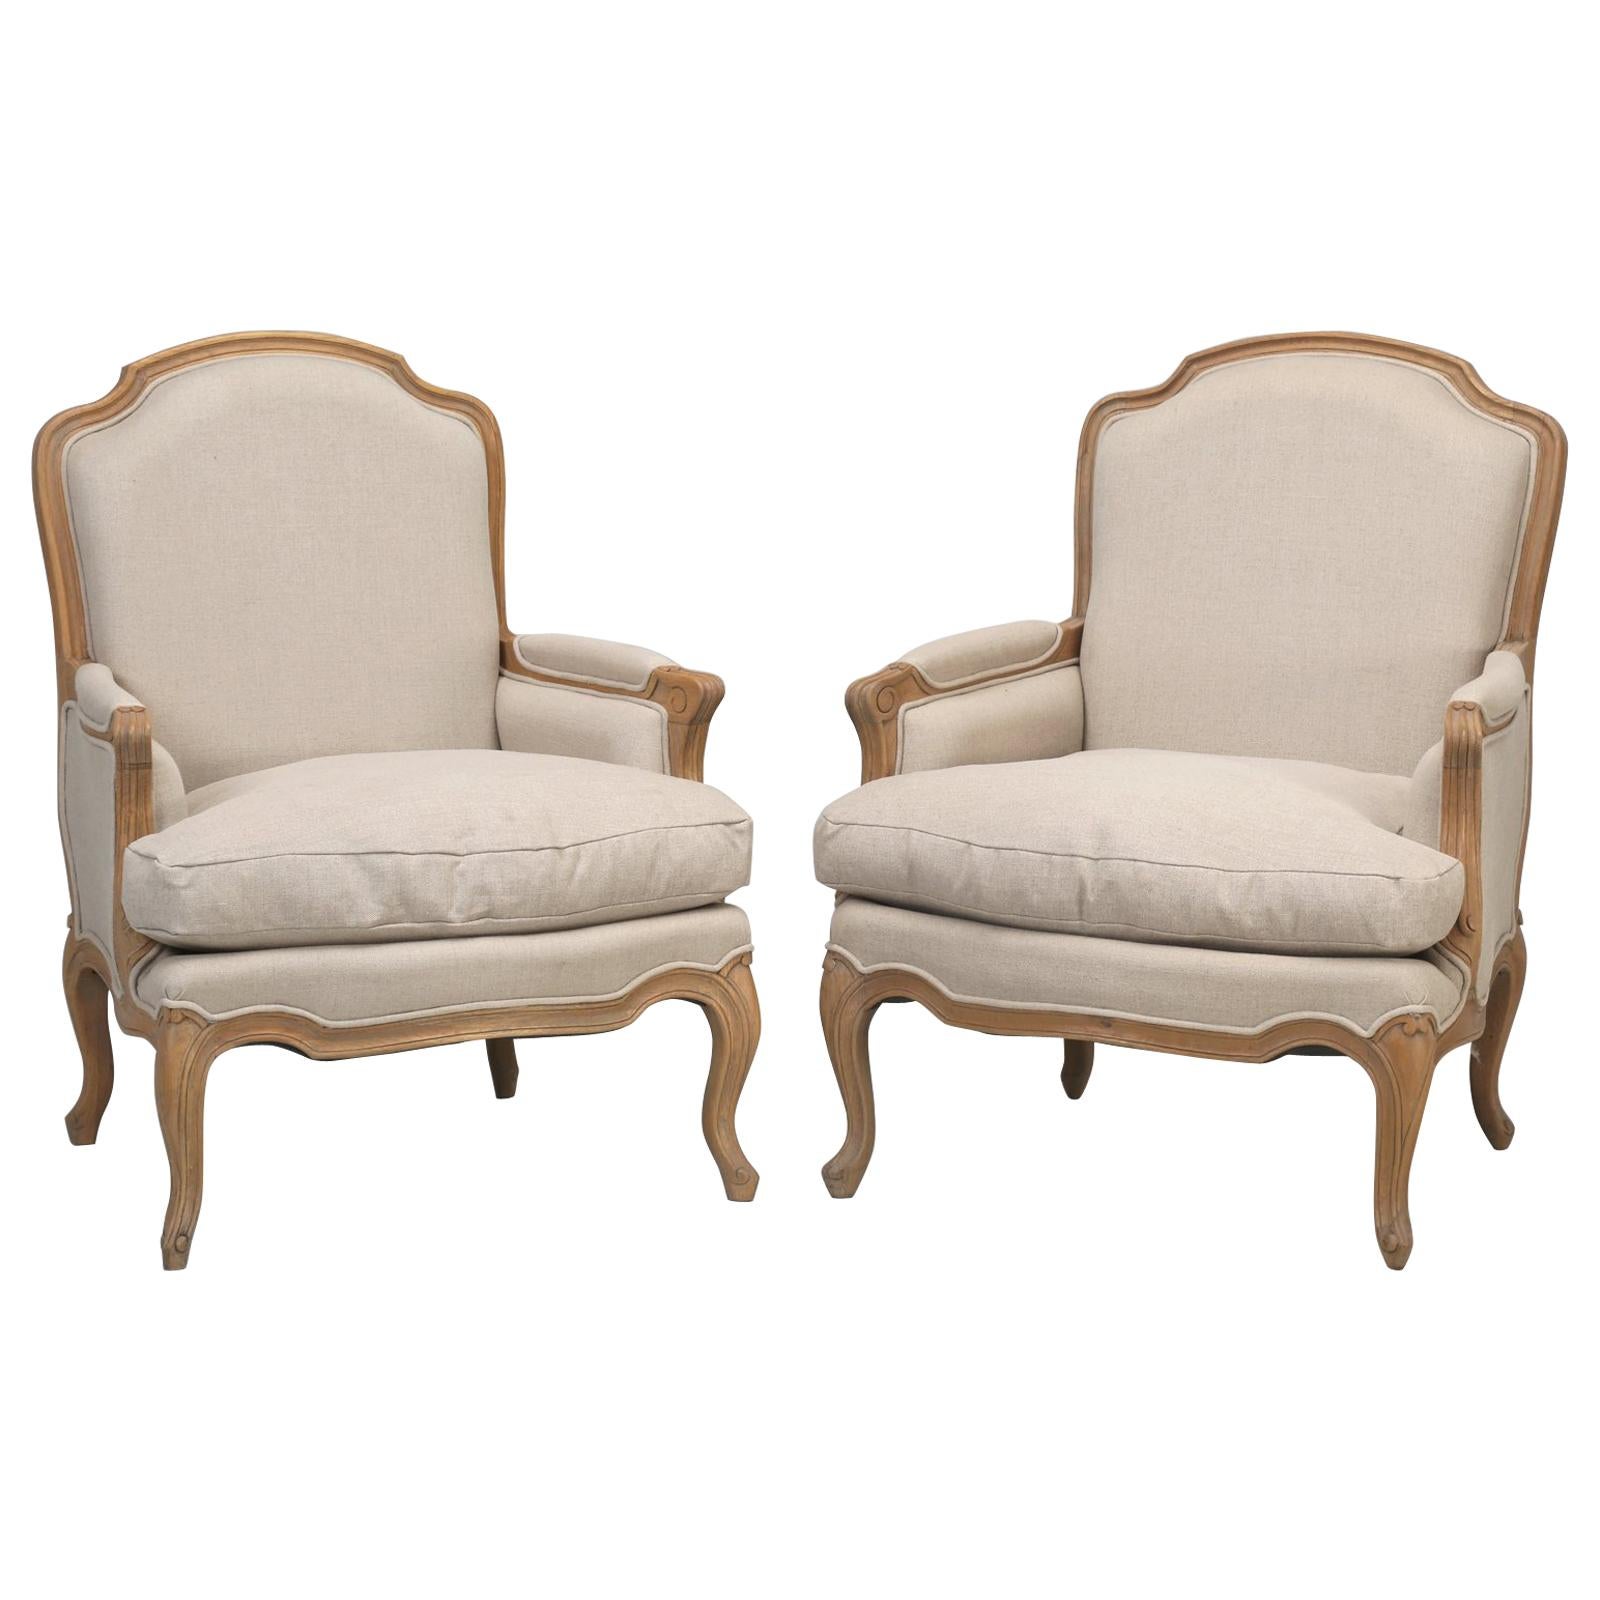 French Style Louis XV Bergère Chair Made of White Oak and Upholstered in Linen